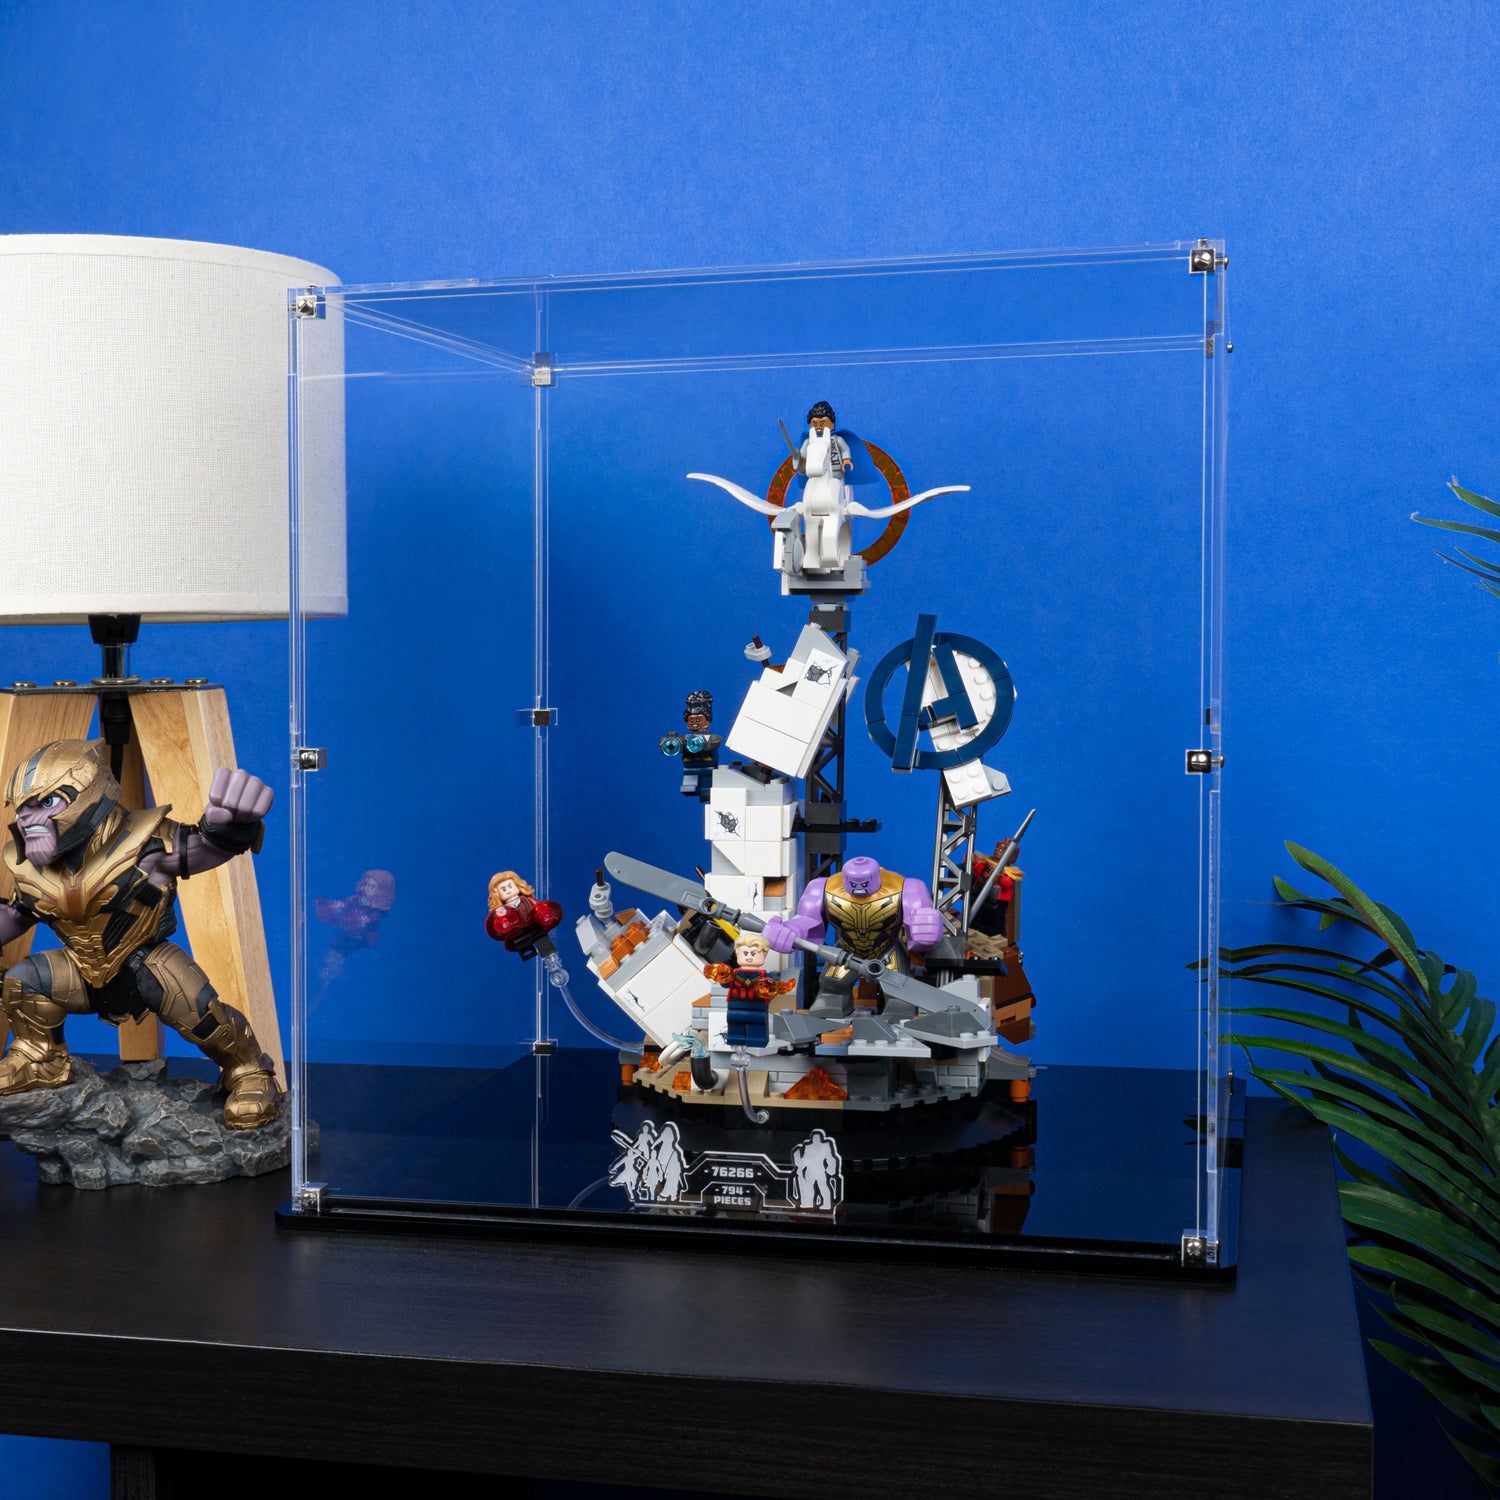 Protect this iconic scene with our crystal clear Perspex® display case